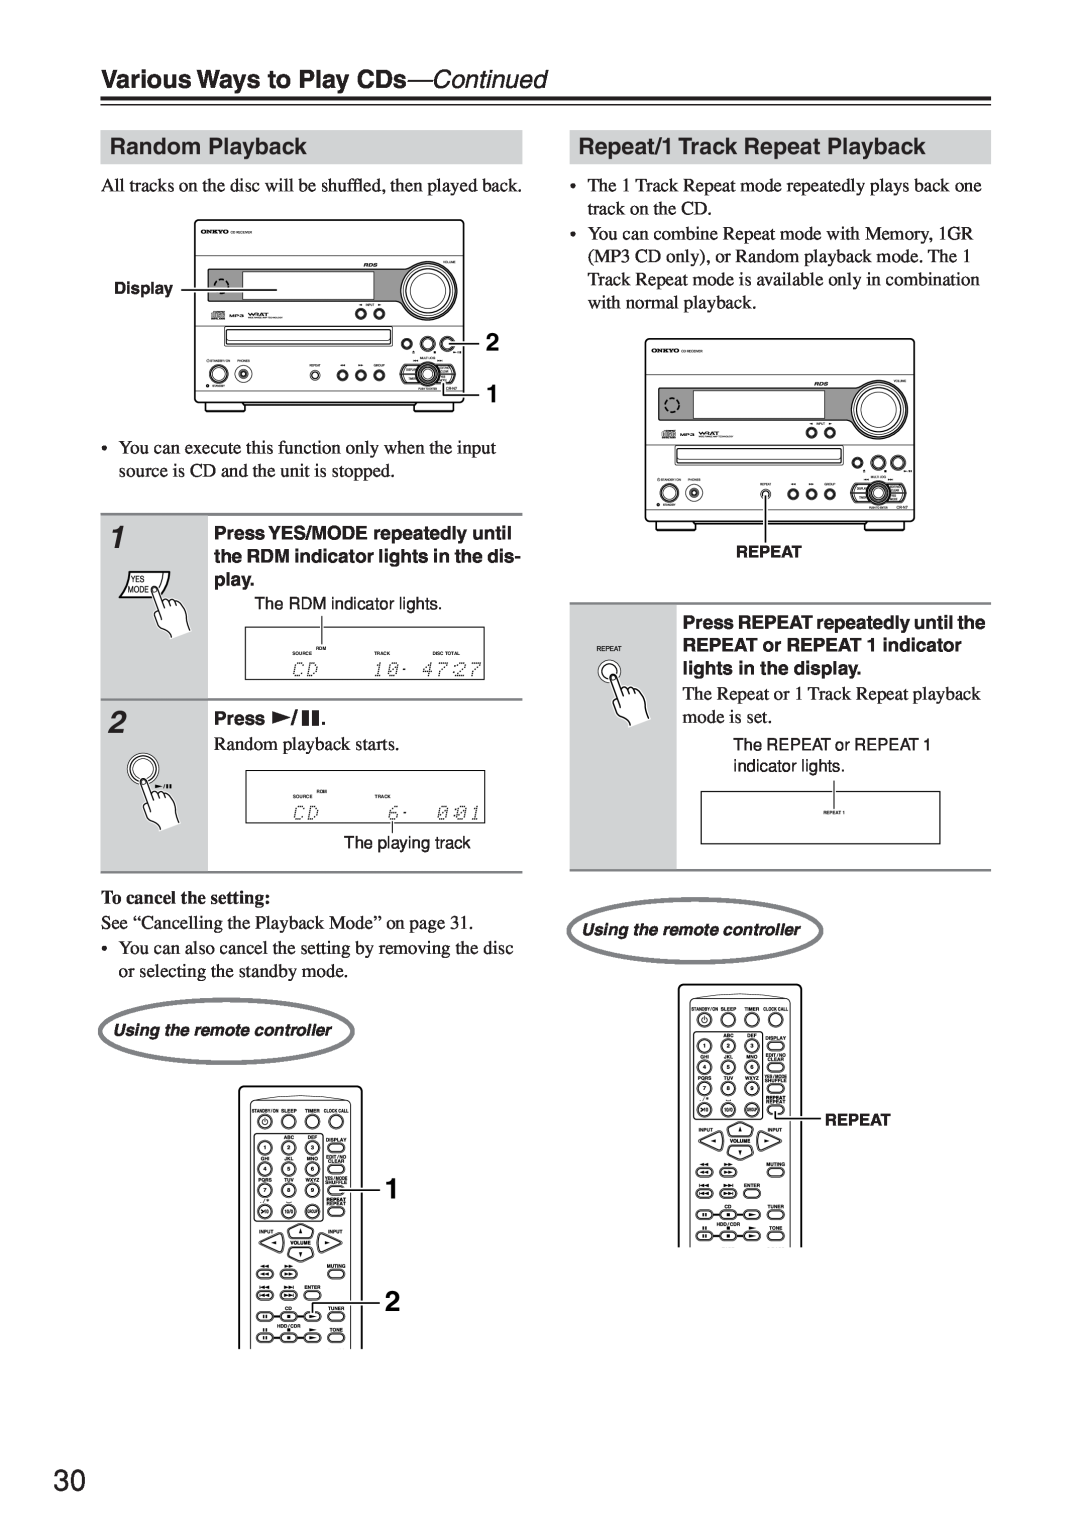 Onkyo CR-N7 Various Ways to Play CDs-Continued, Random Playback, Repeat/1 Track Repeat Playback, Random playback starts 